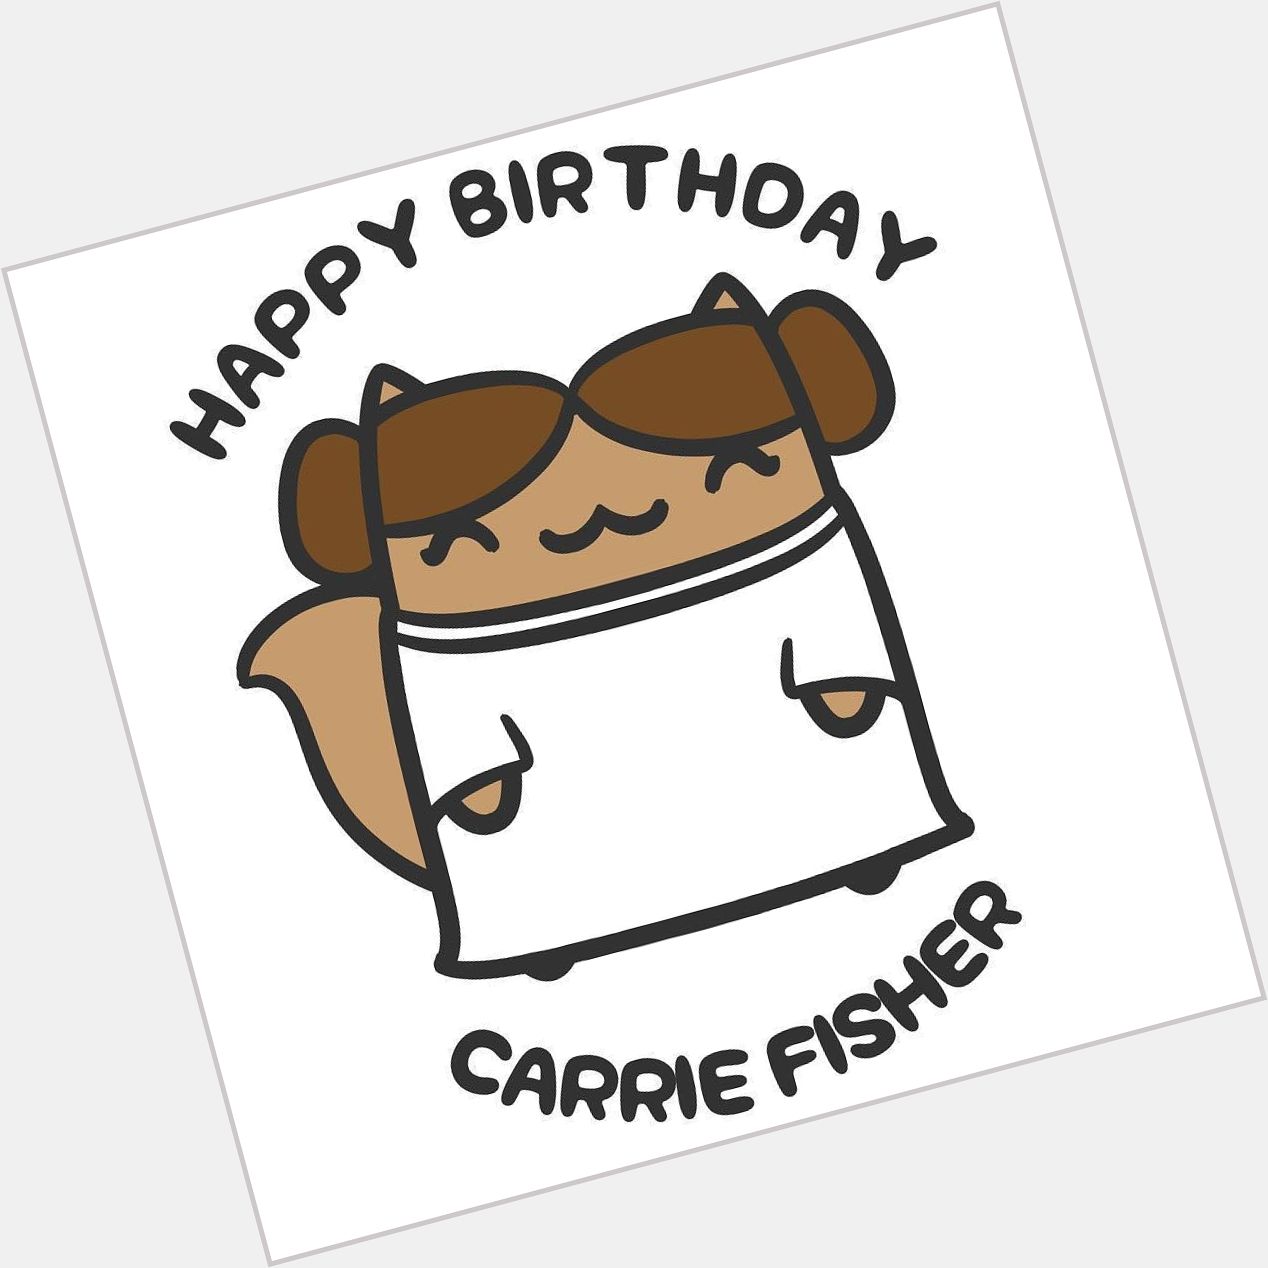 Happy Birthday, Carrie Fisher! Princess Leia was one of my favorite female role models gro 